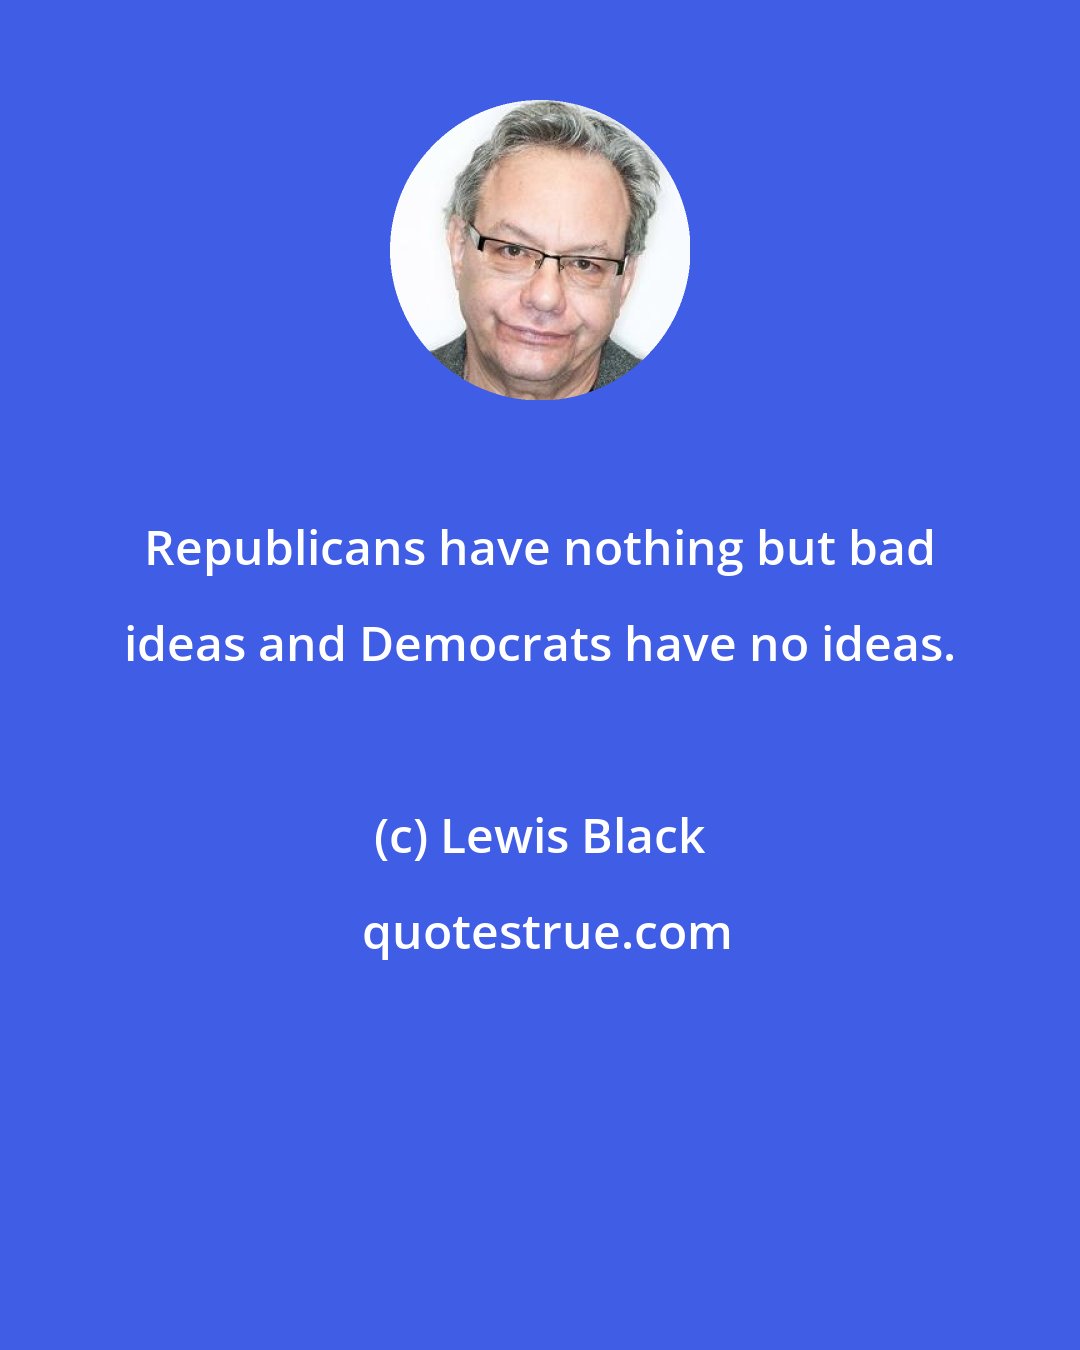 Lewis Black: Republicans have nothing but bad ideas and Democrats have no ideas.